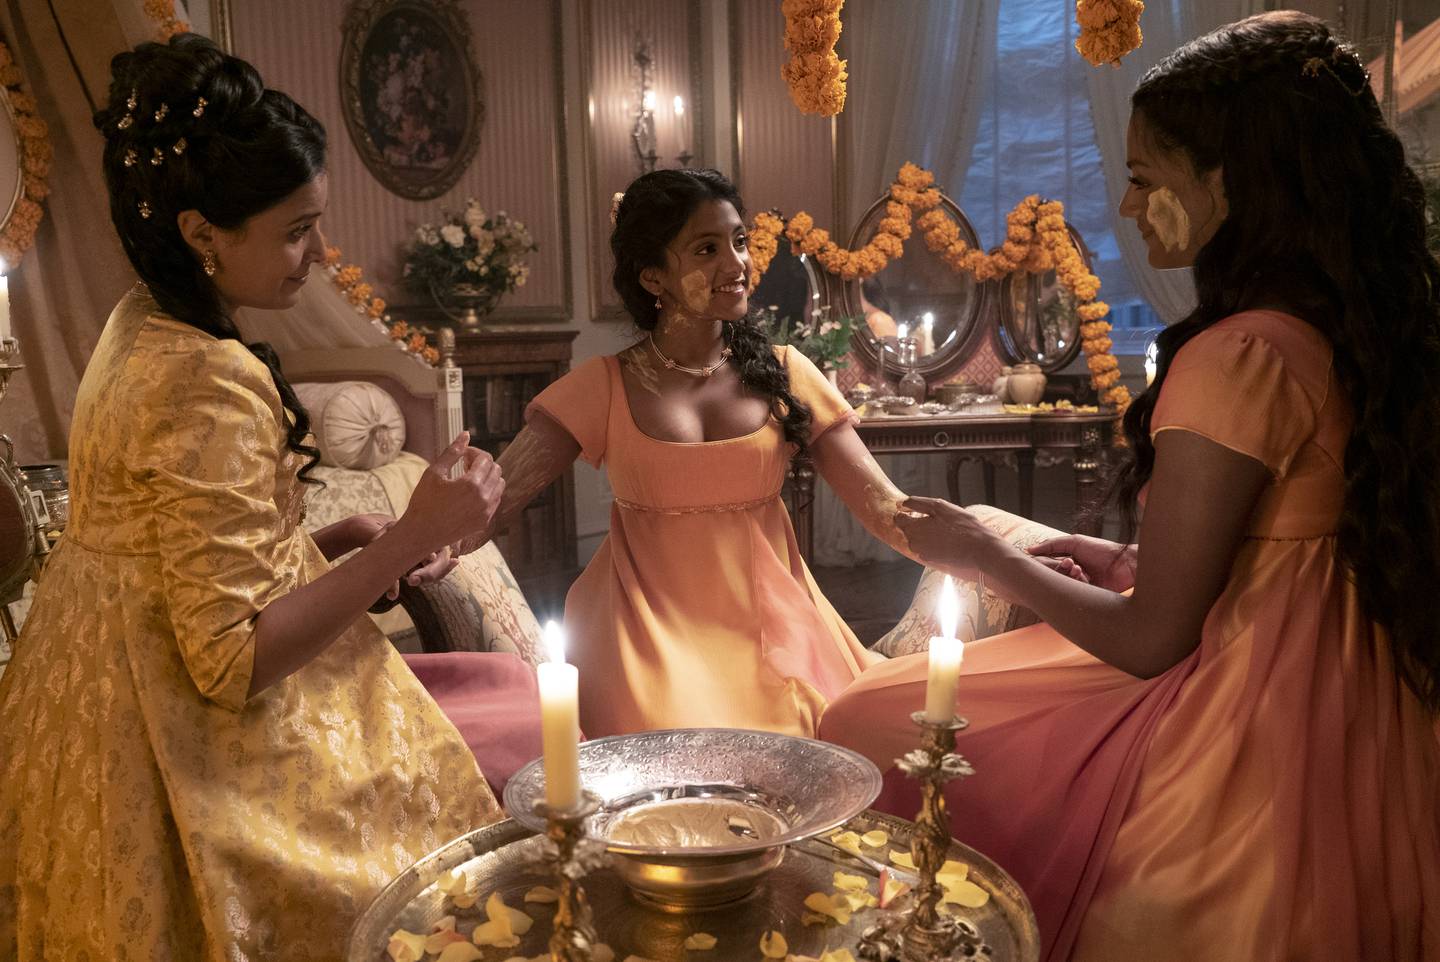 Scenes featuring a haldi (turmeric) ceremony, a pre-wedding ritual for brides in North Indian weddings, went down well with Indian audiences. Photo: Netflix 